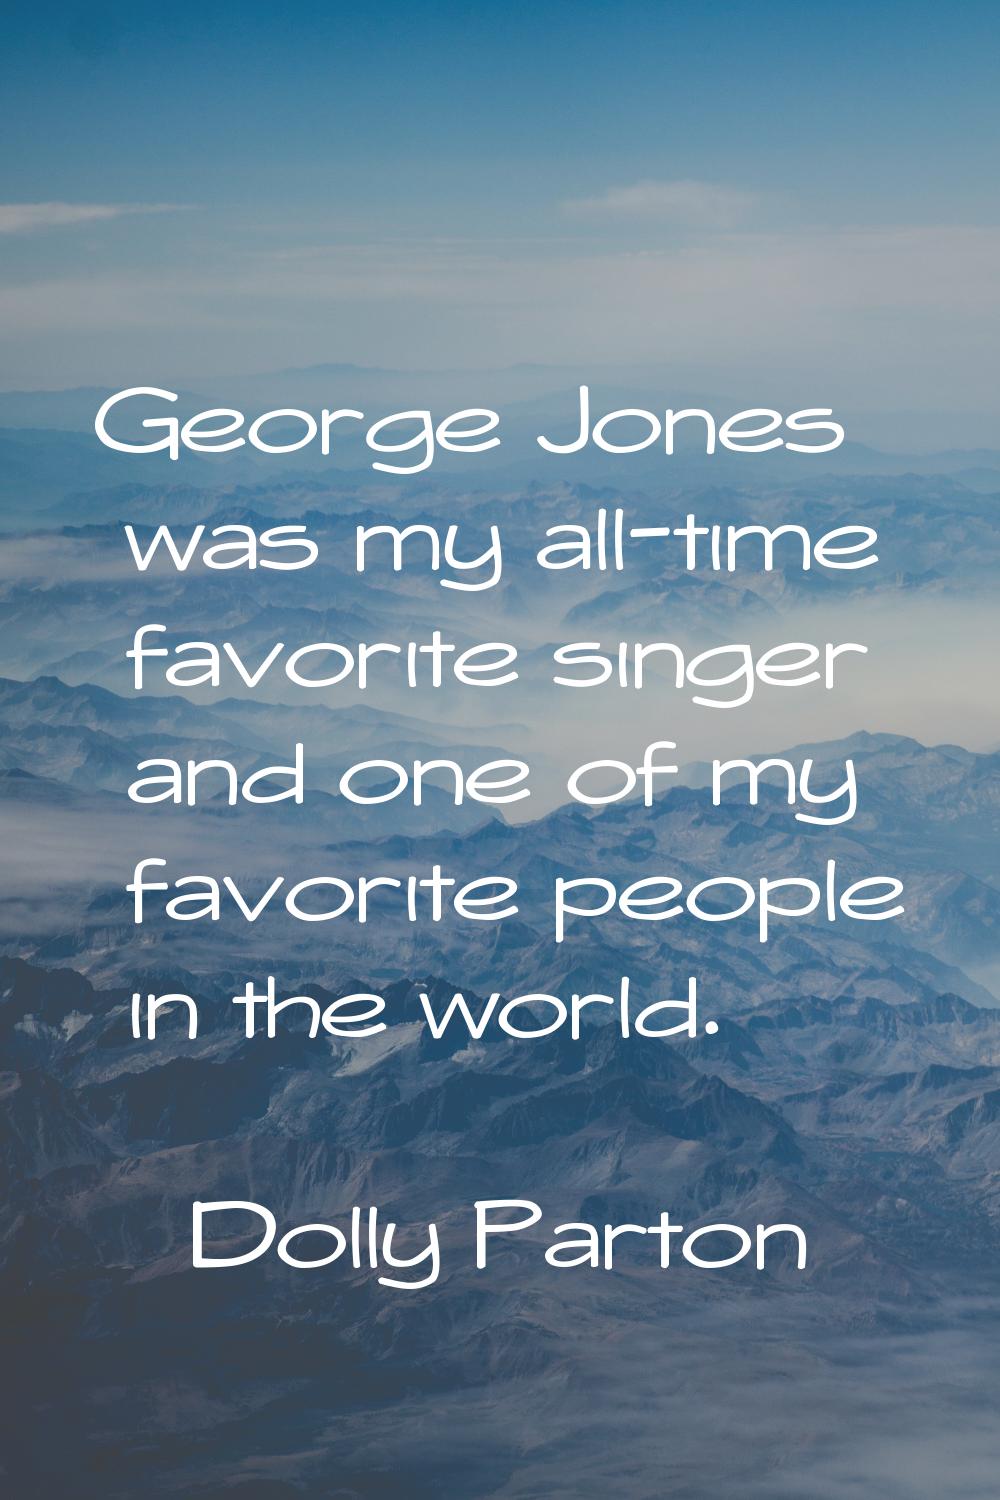 George Jones was my all-time favorite singer and one of my favorite people in the world.